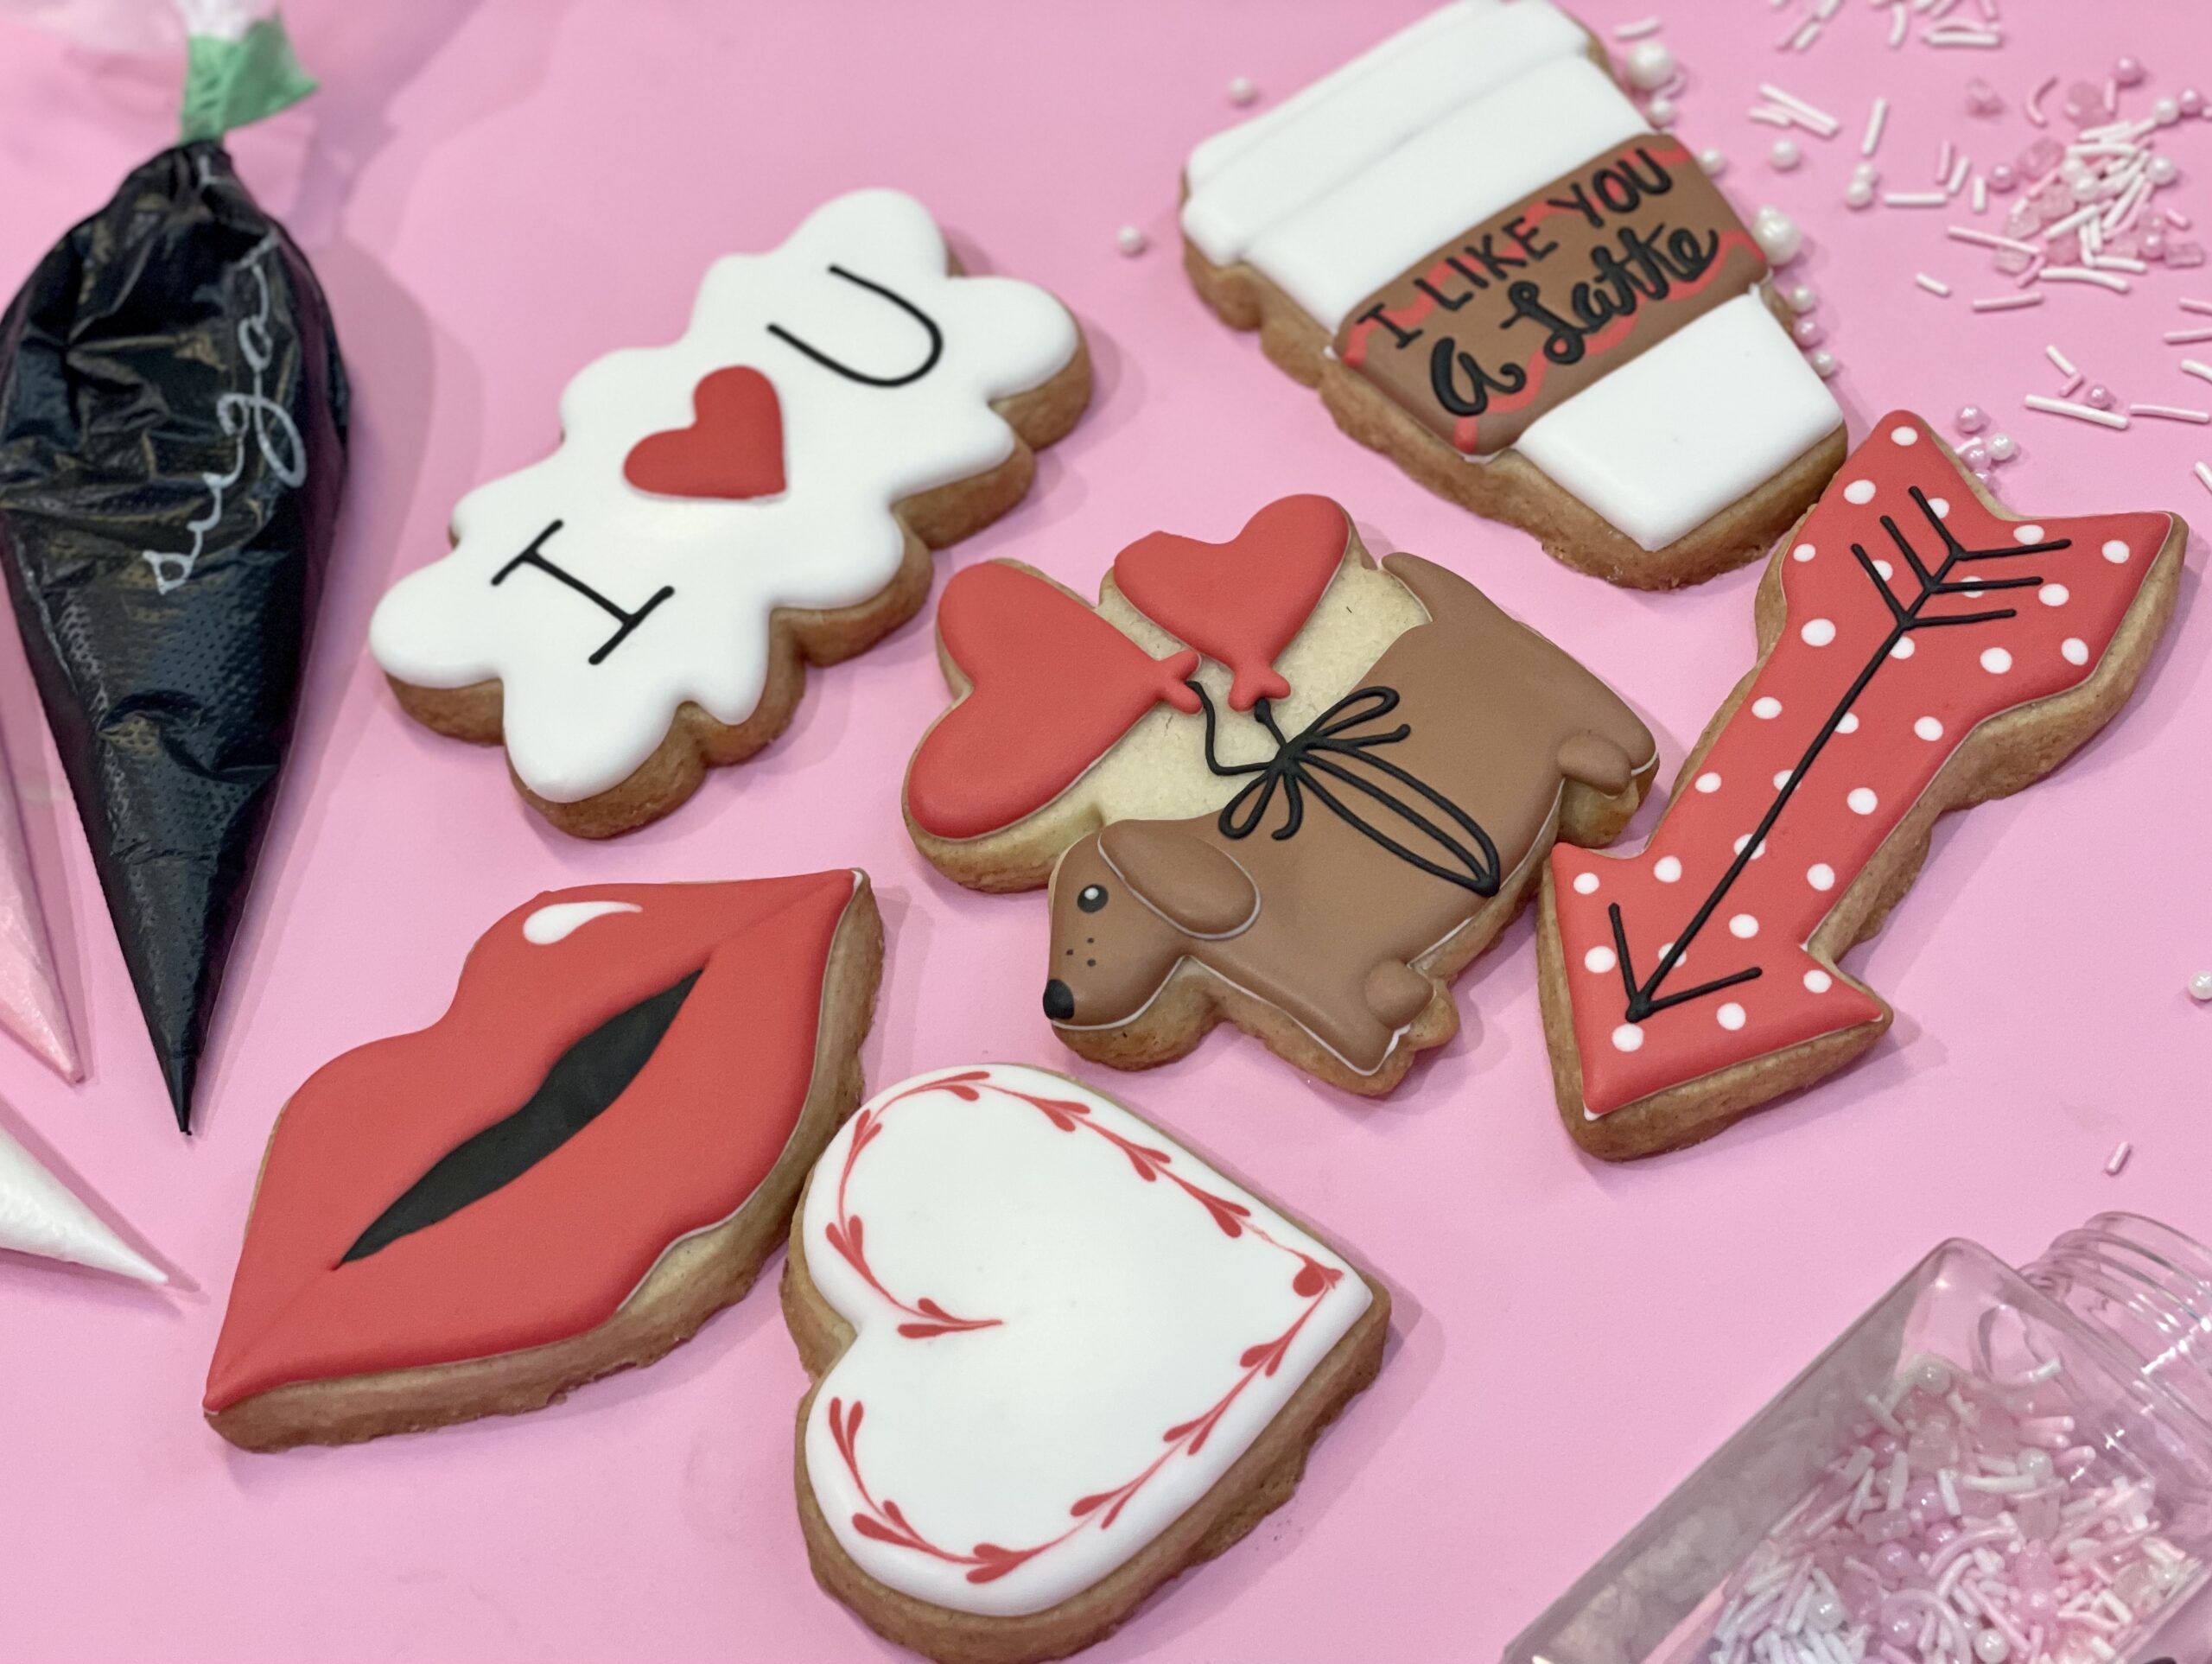 What Do You Need For Cookie Decorating Supplies? - Your Baking Bestie